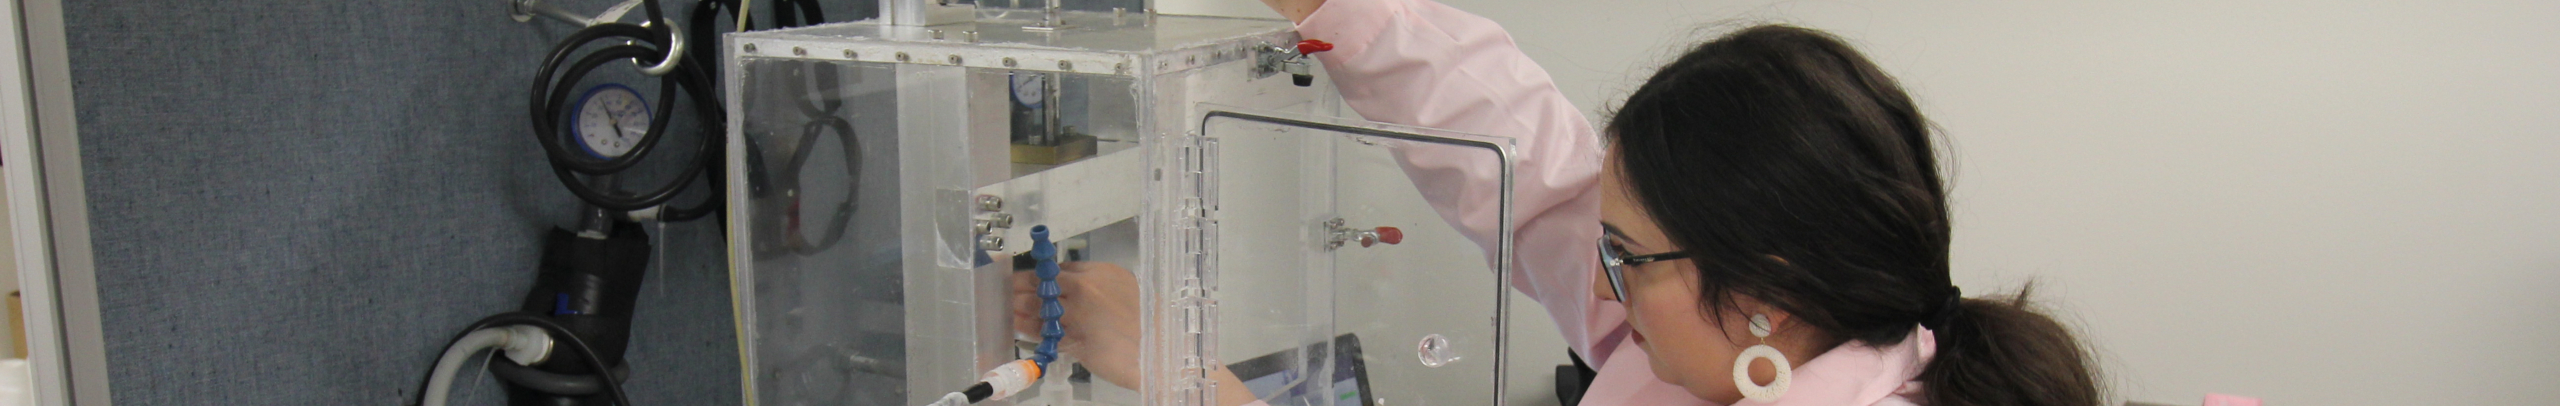 A Duke CEE student reaches into equipment in a laboratory